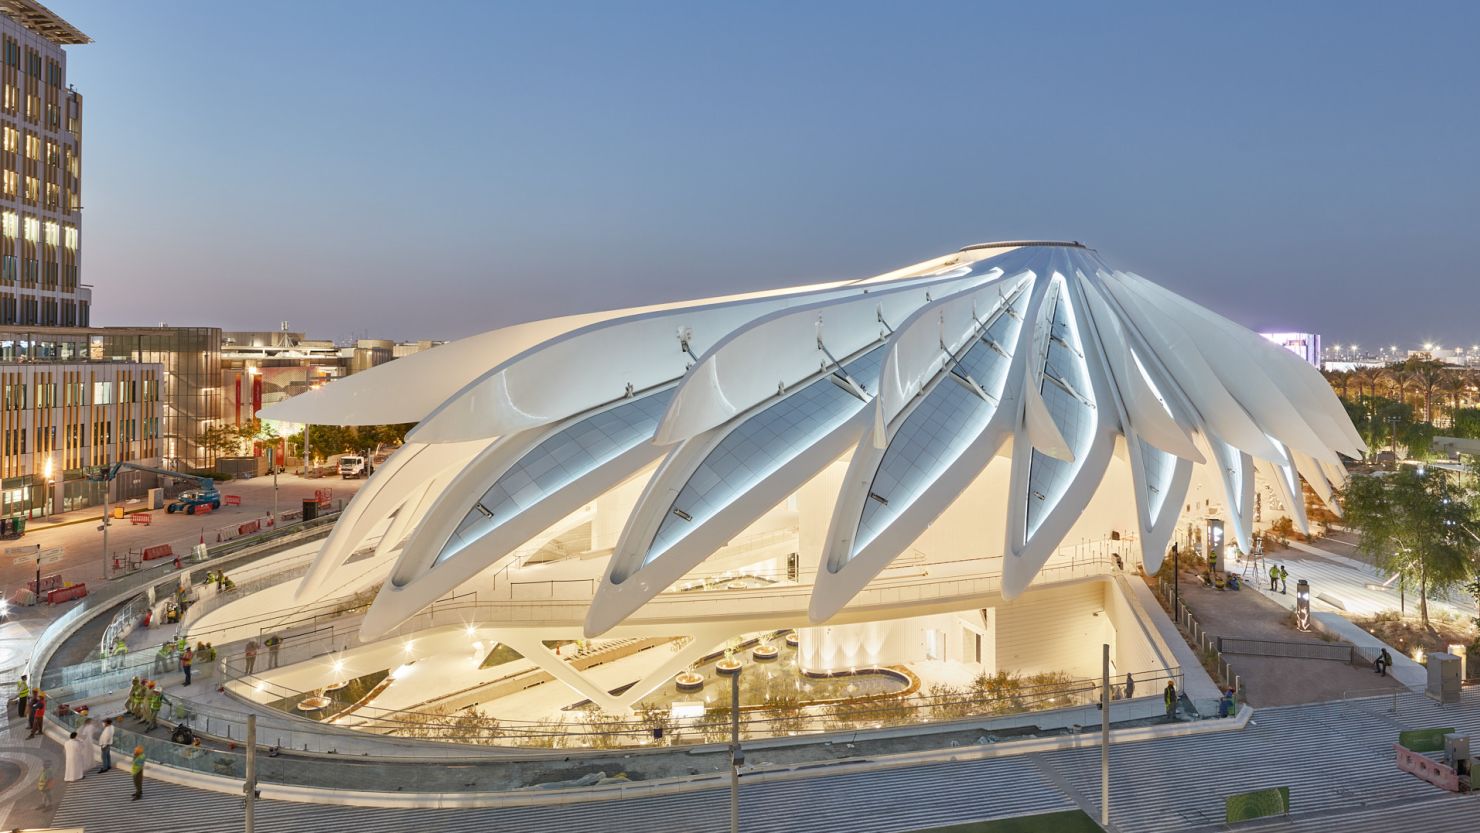 UAE's stunning Expo pavilion is topped by 'falcon wings